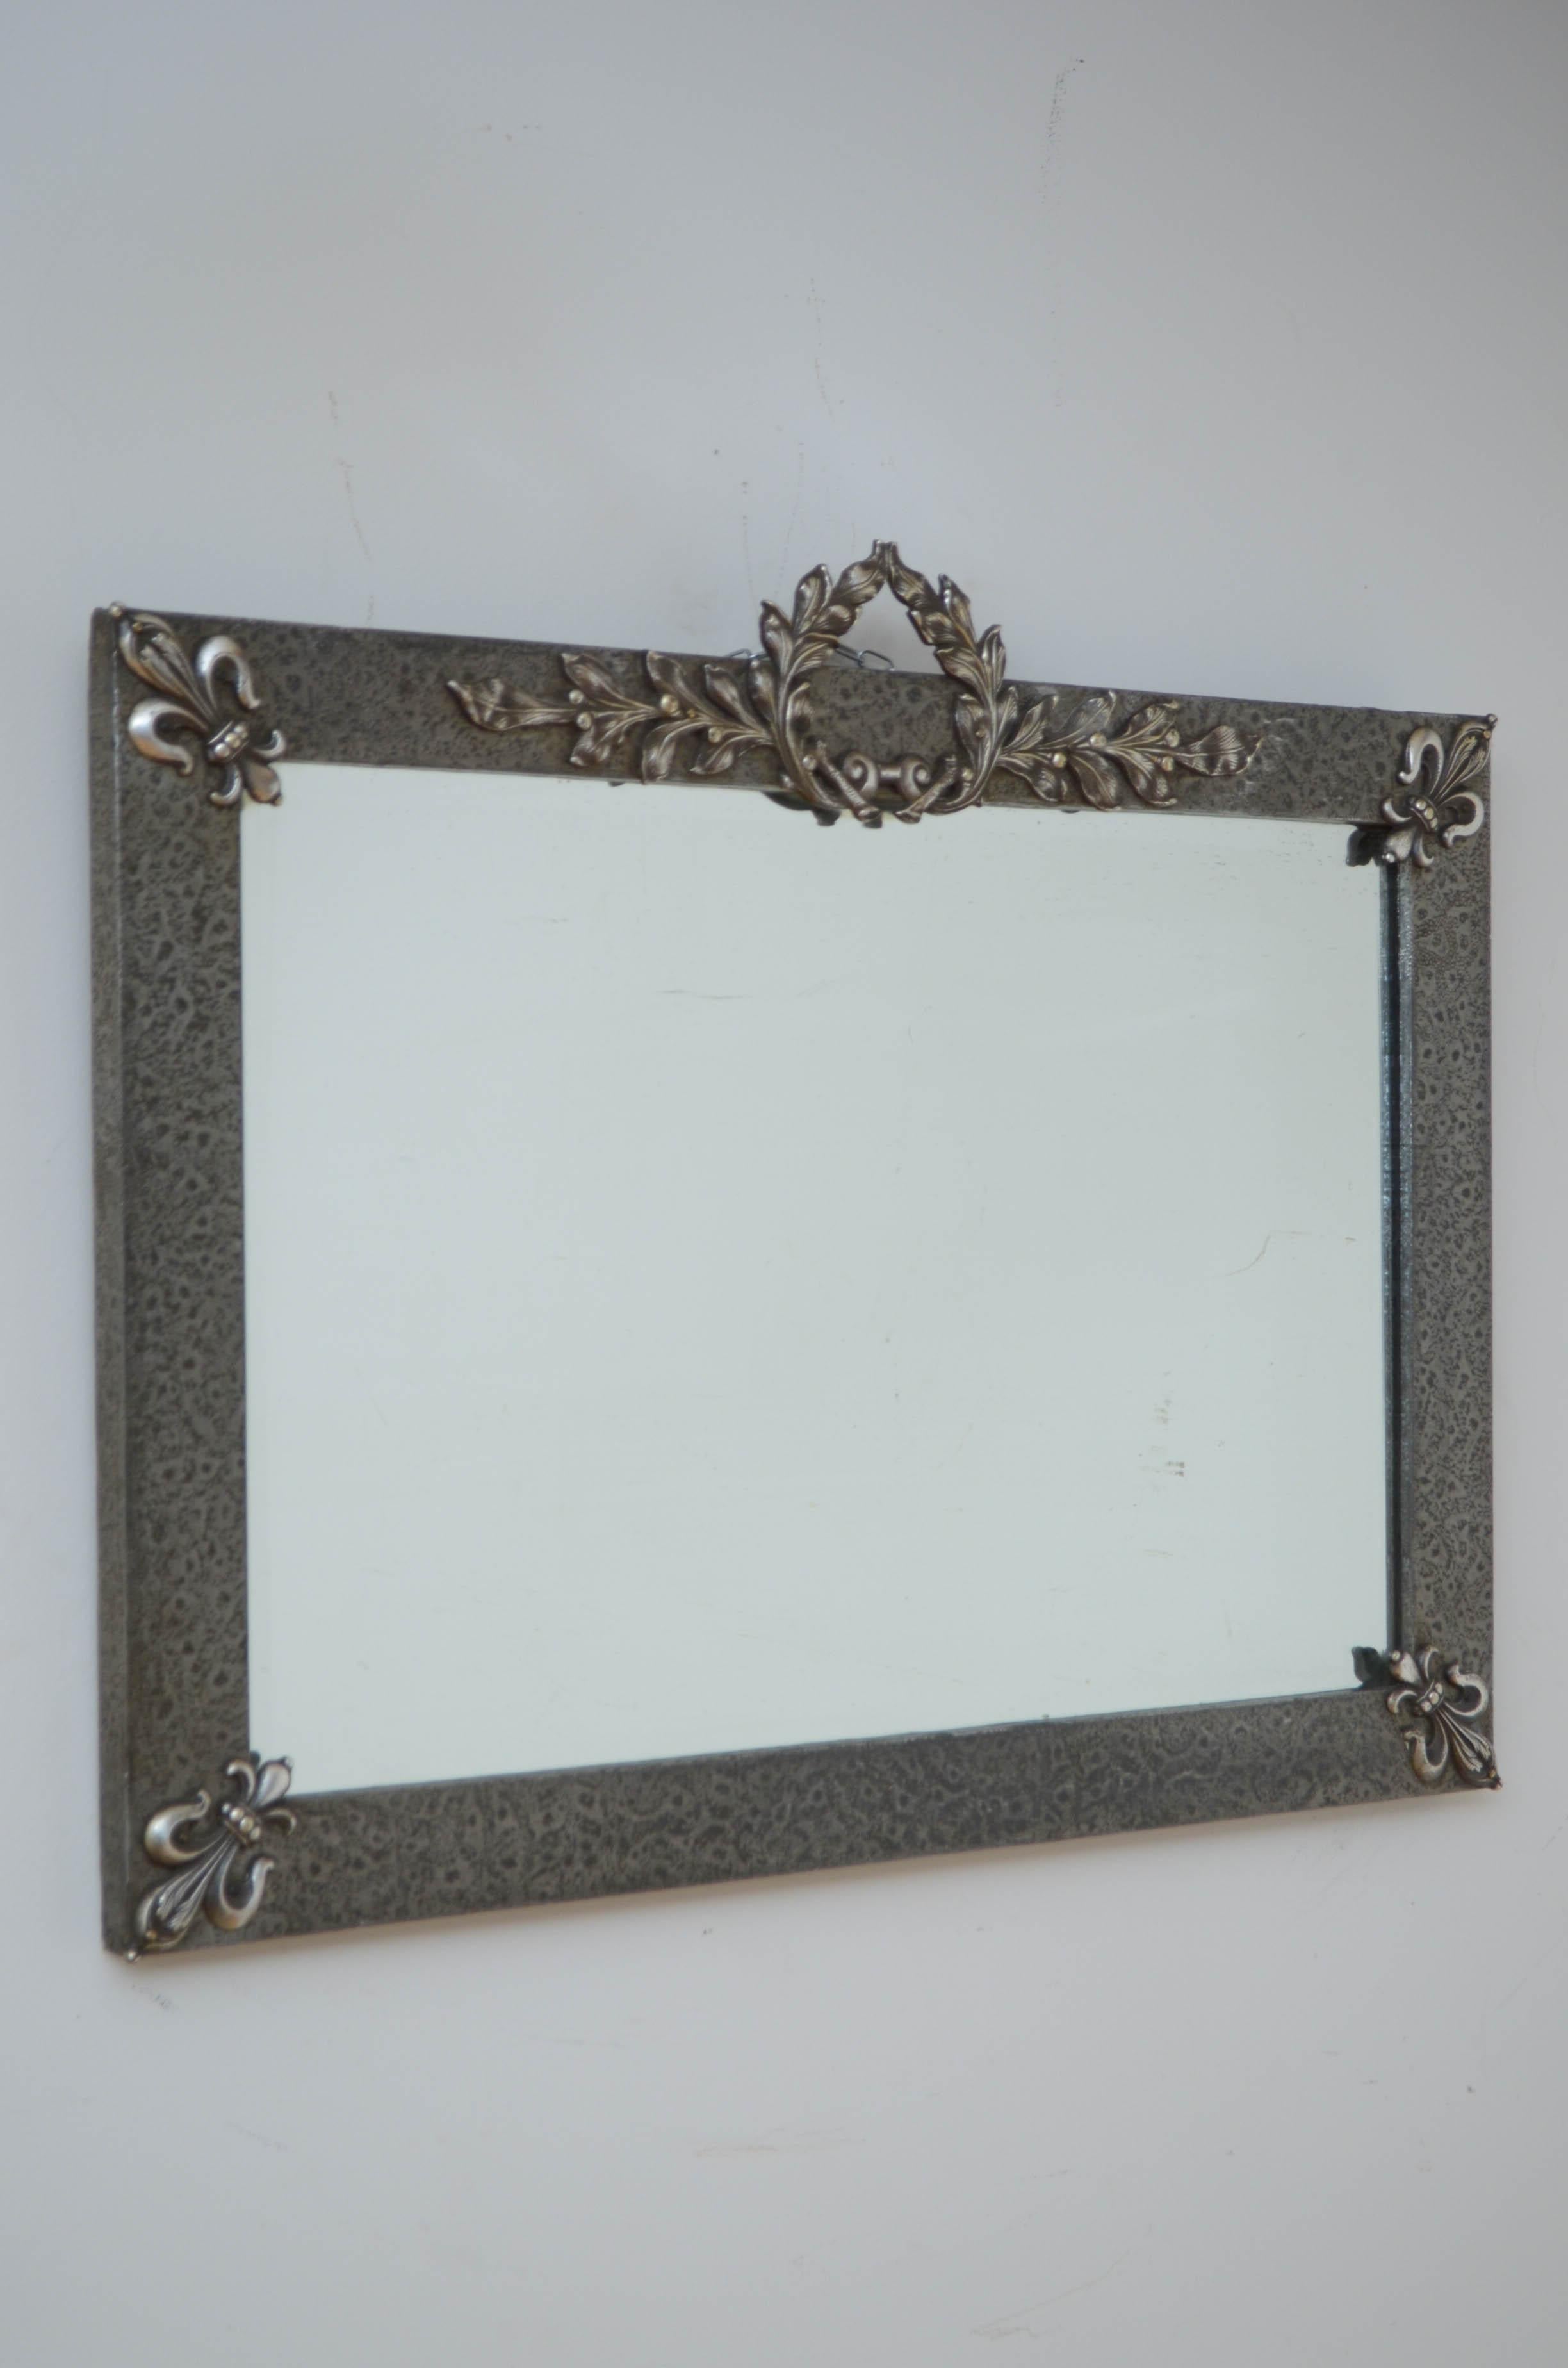 K0552 Stylish Arts and Crafts mirror with original bevelled edge glass in metal hammered frame with fleur de lys decoration to the corners and laurel wreath to the centre. All fitted with original metal back and adjustable hanging chain.